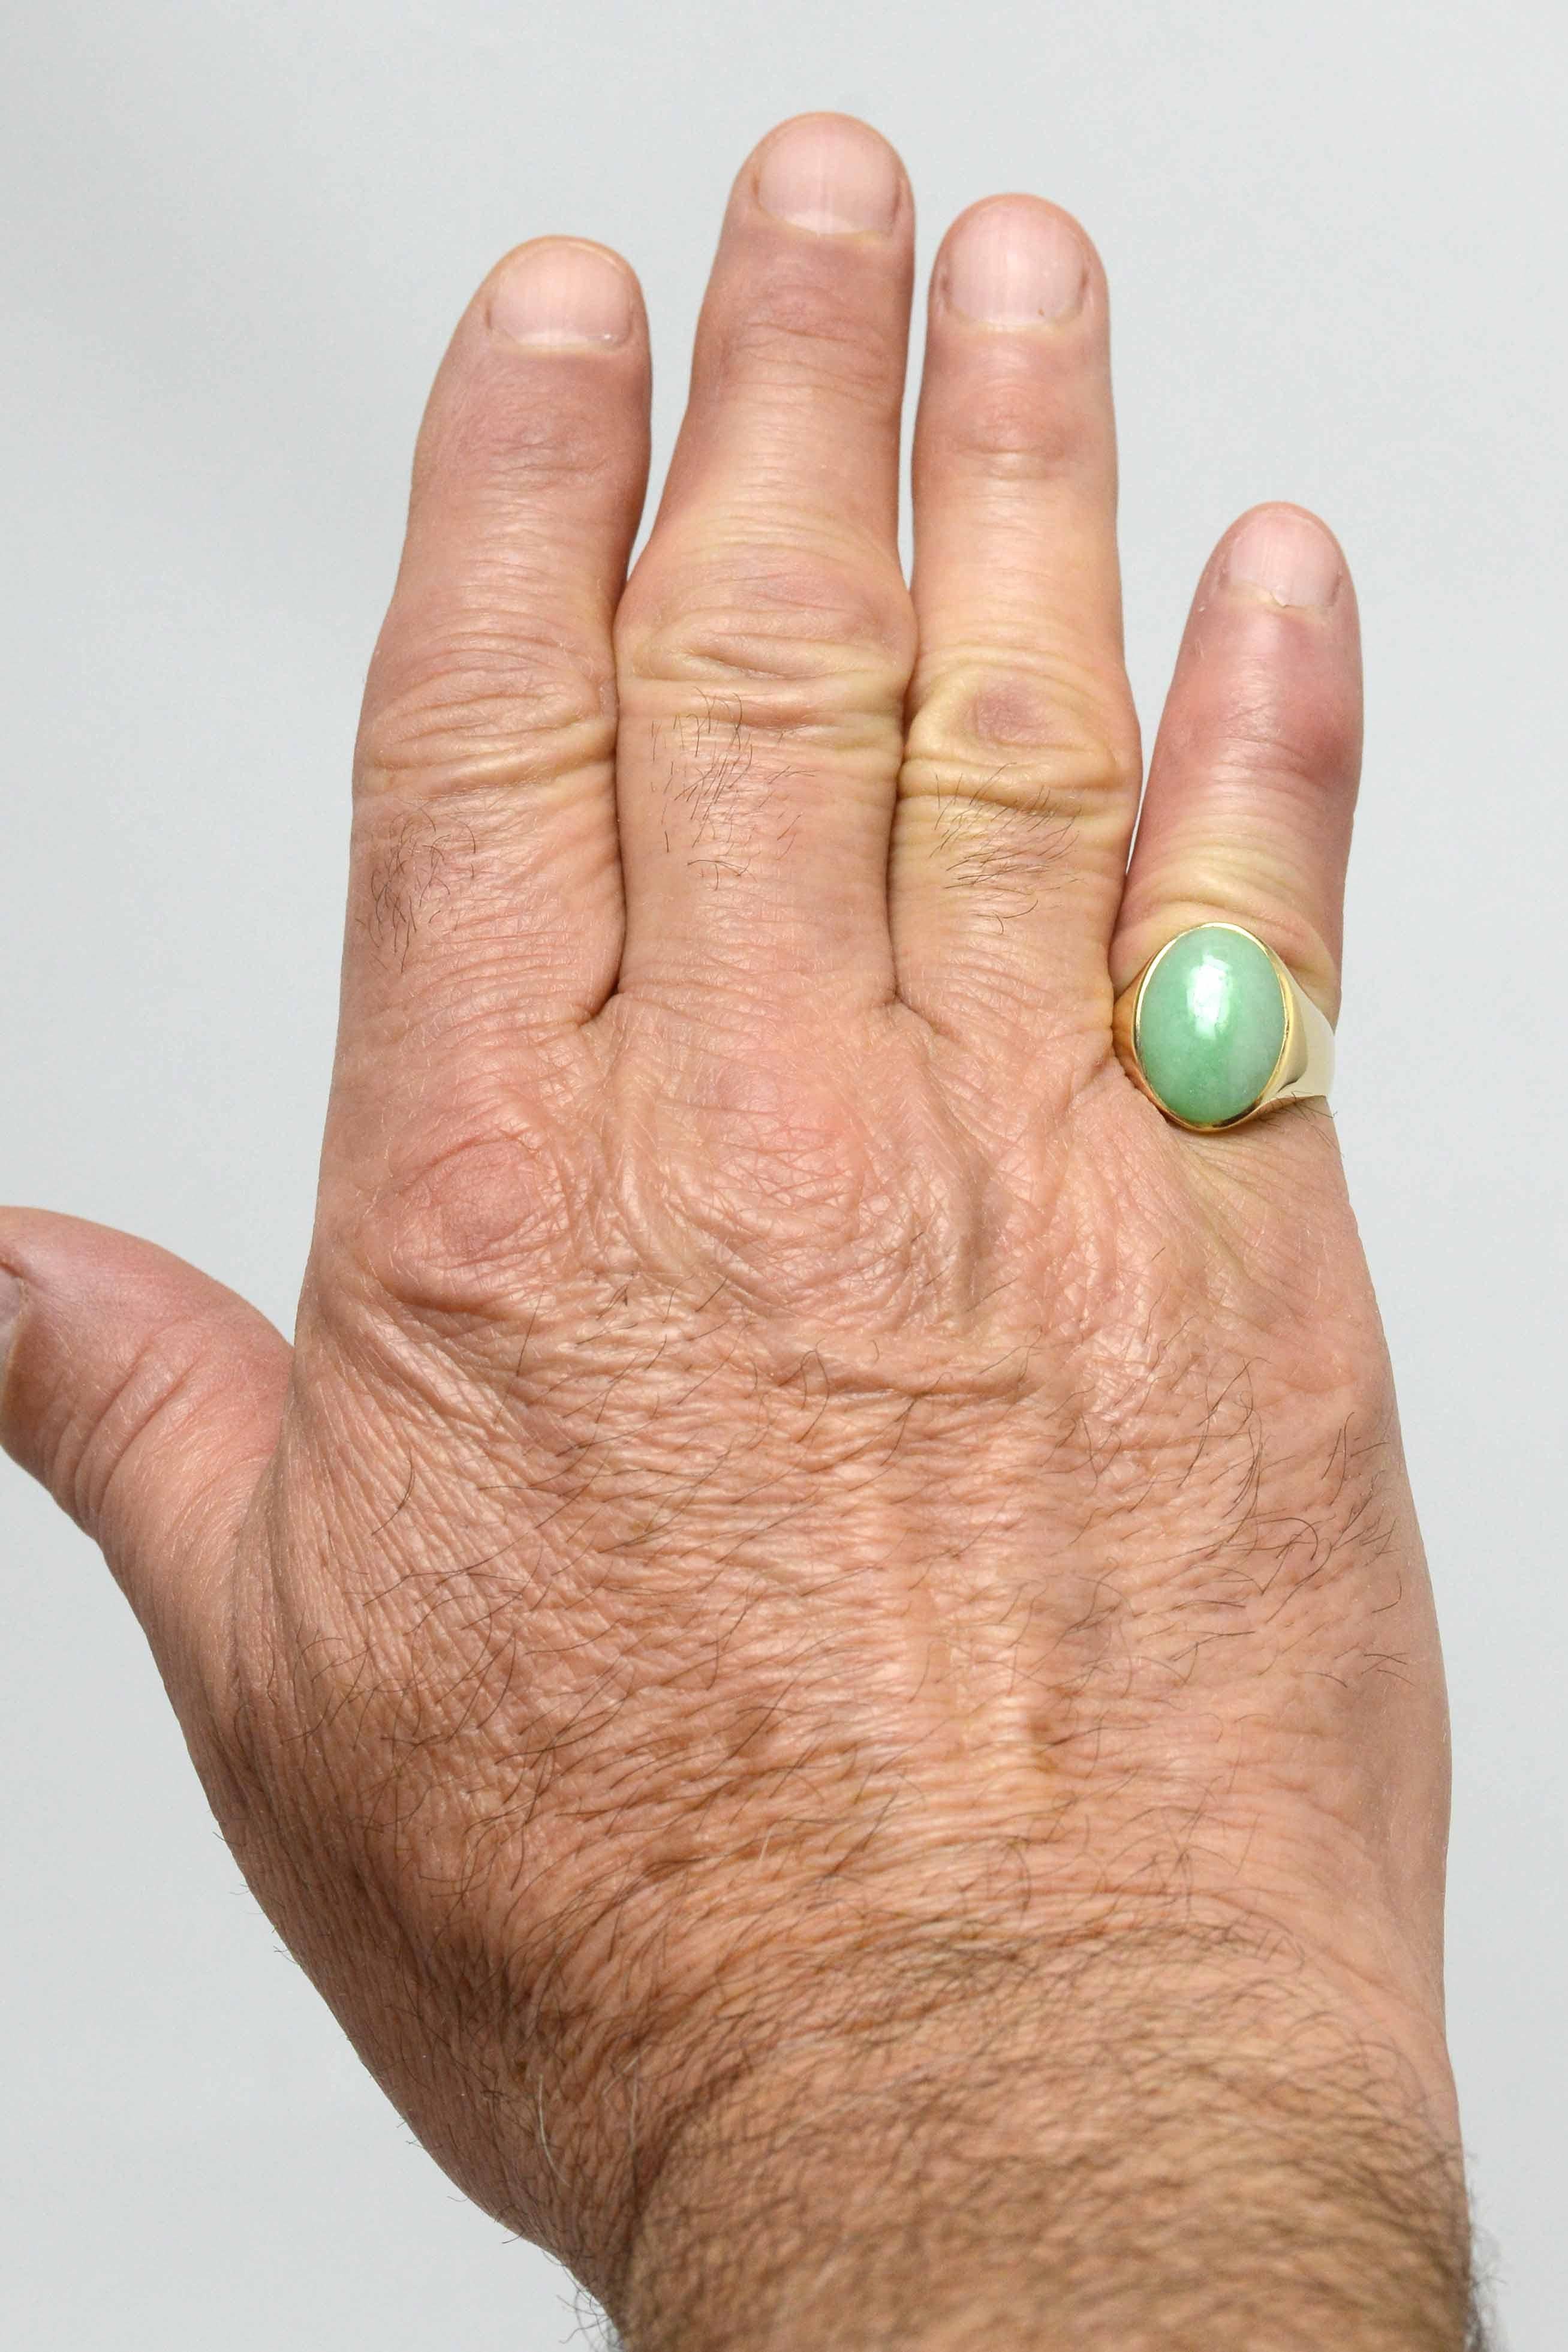 This vintage imperial jade men's ring is a timeless classic. Centering on a vivid green jadeite cabochon with a lovely, lustrous watery feel. No evidence of treatment or dye is present in this shimmering, natural Burmese jade. A unisex design, can